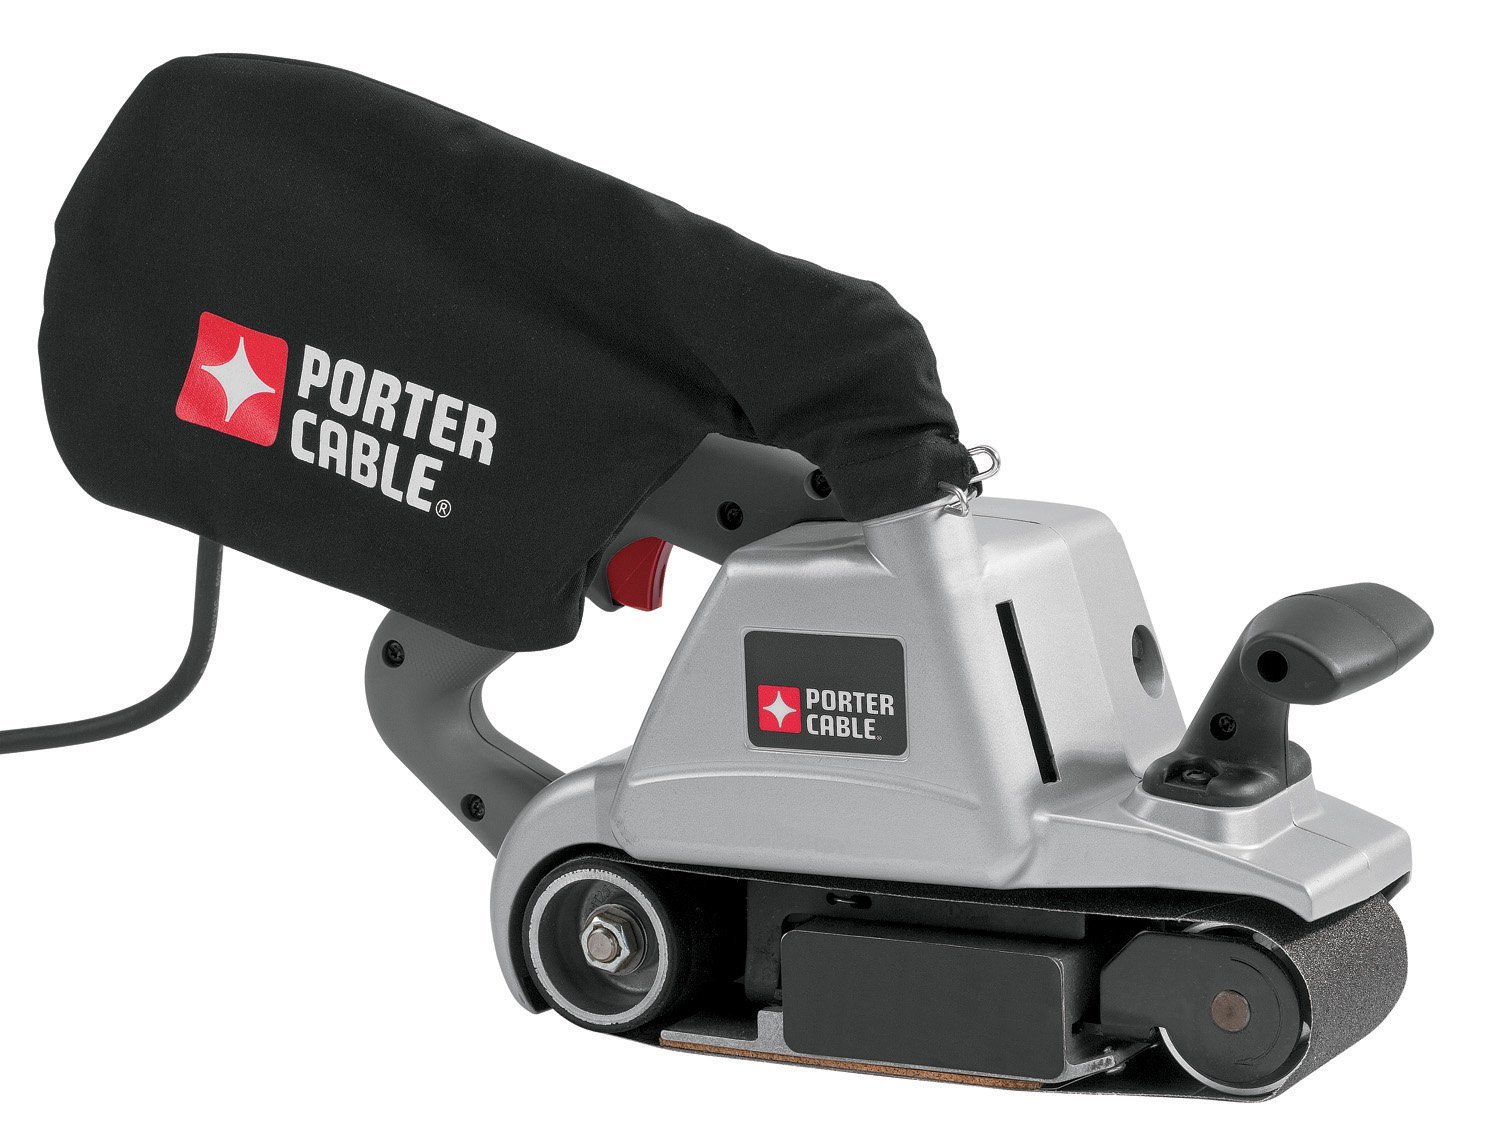 Porter-Cable 7345 5-Inch Variable-Speed Random Orbit Sander for Woodworking